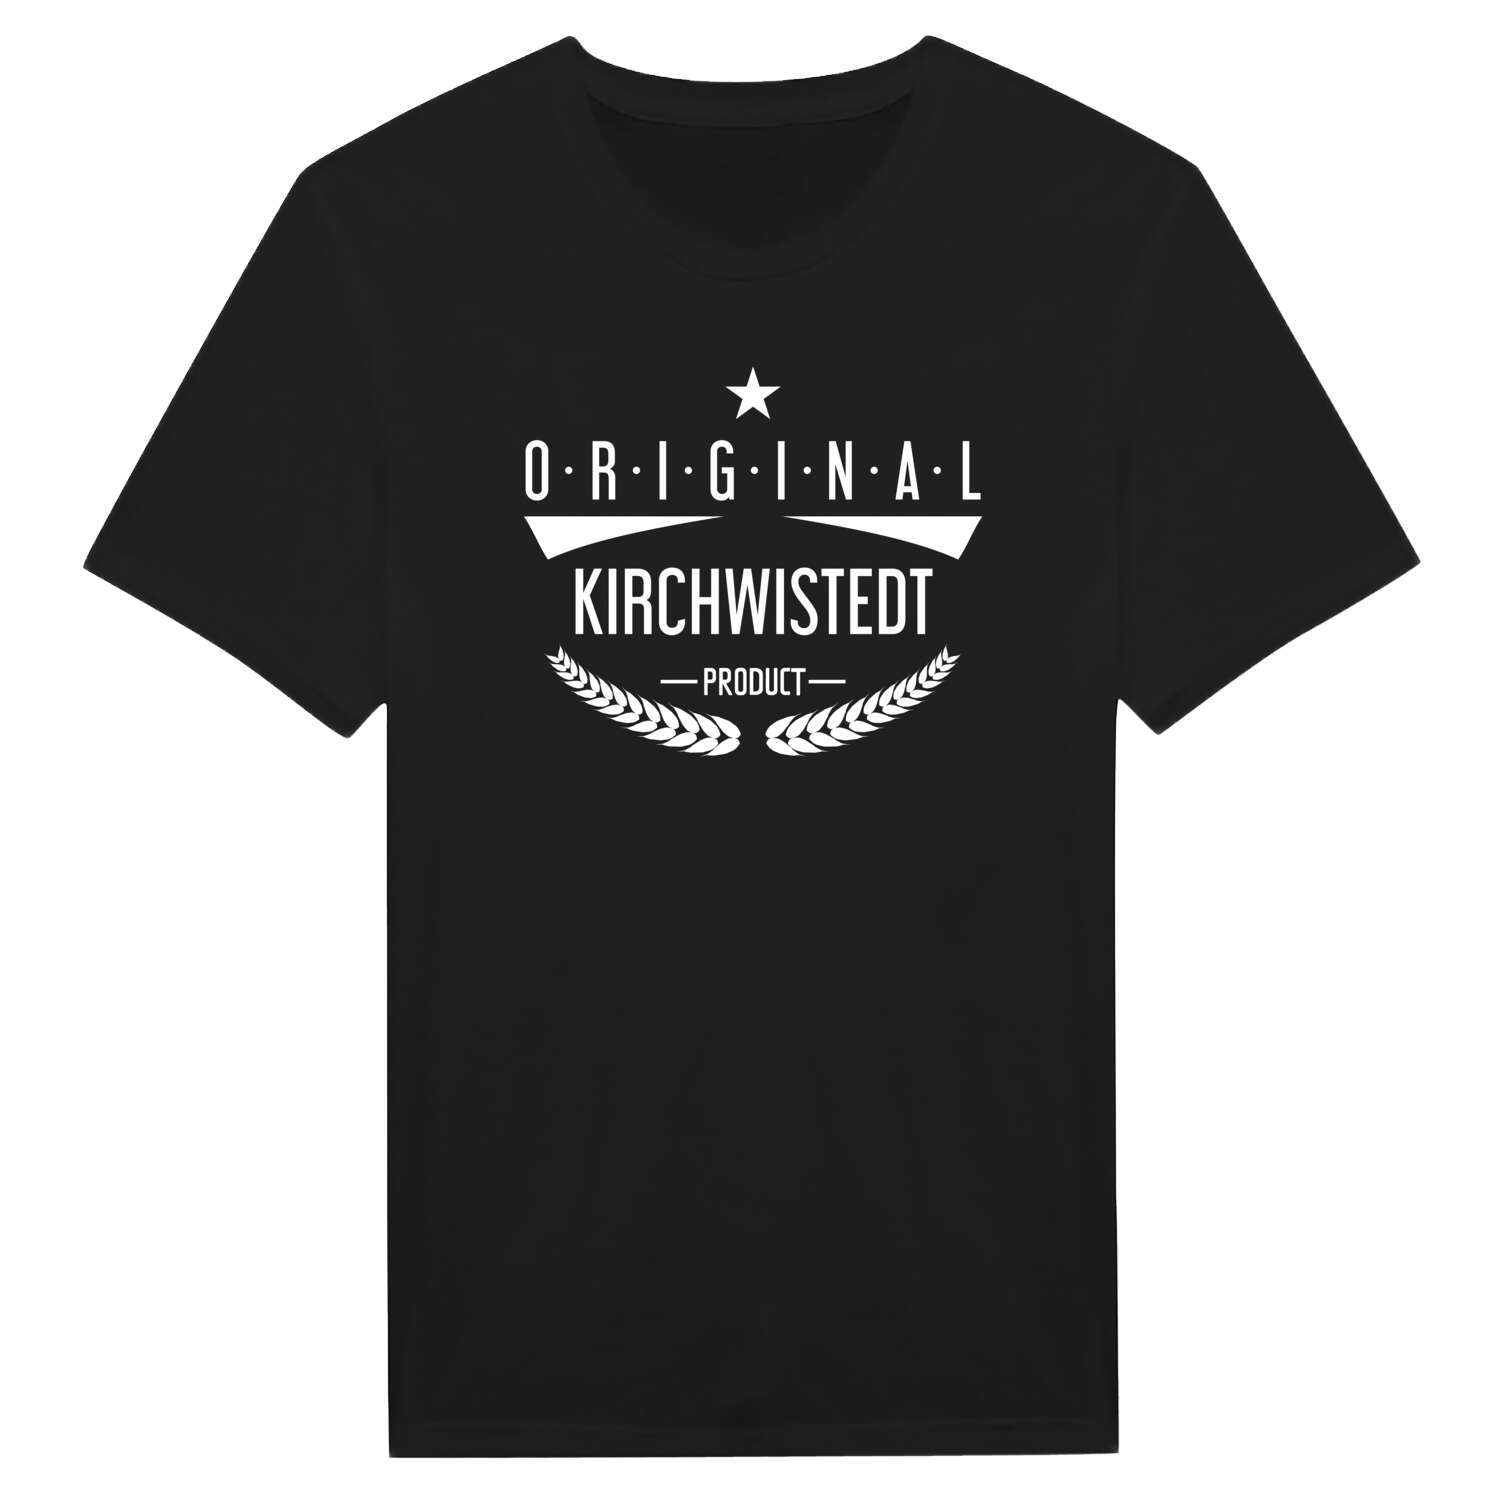 Kirchwistedt T-Shirt »Original Product«